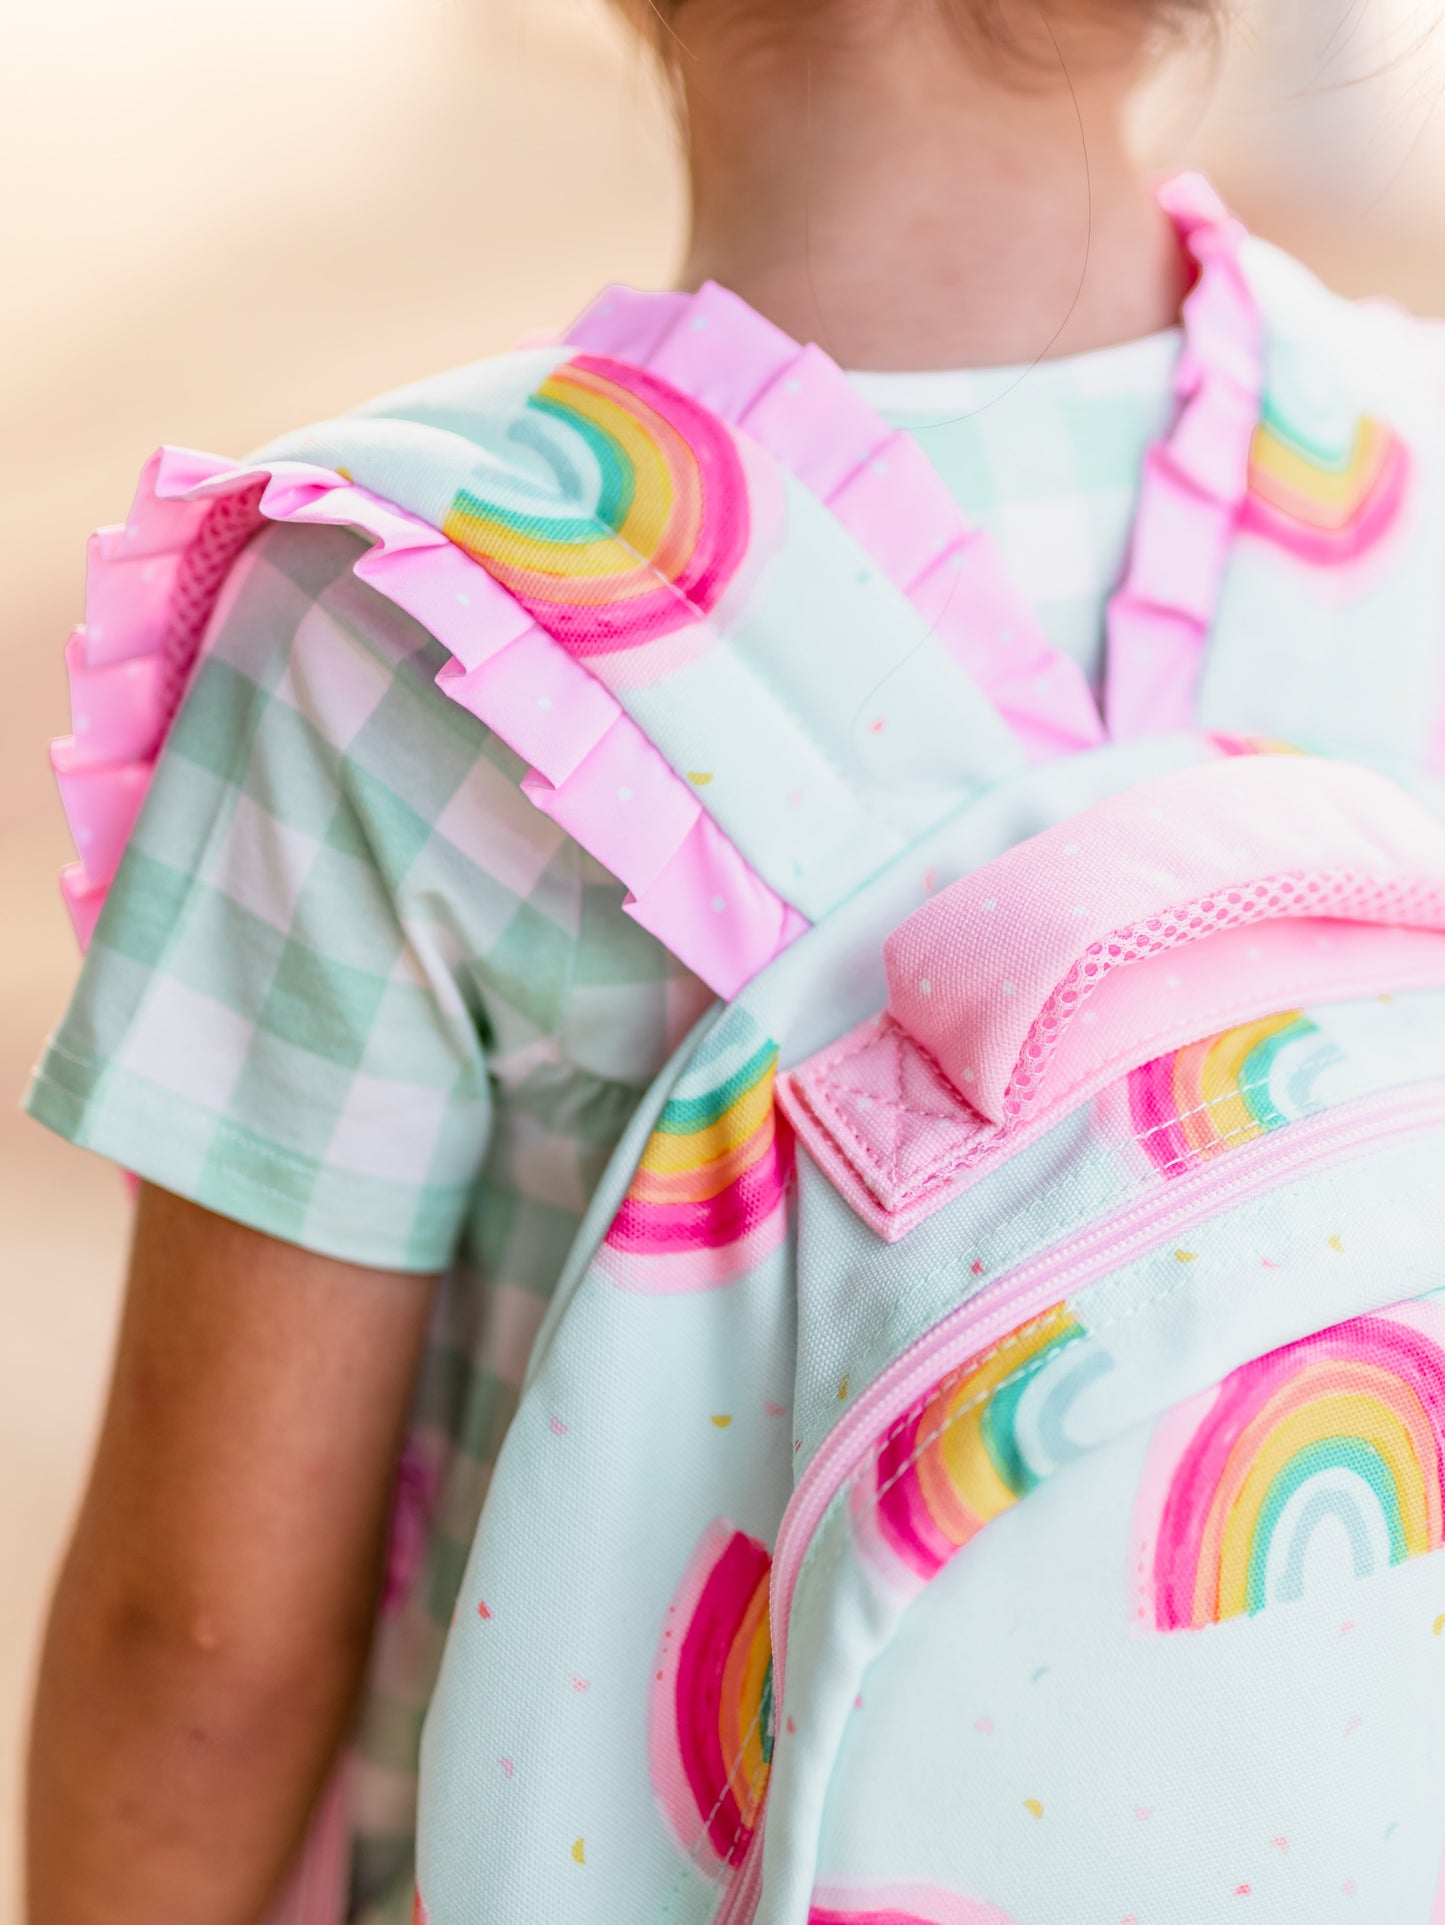 Ridley Backpack - Candy Rainbows